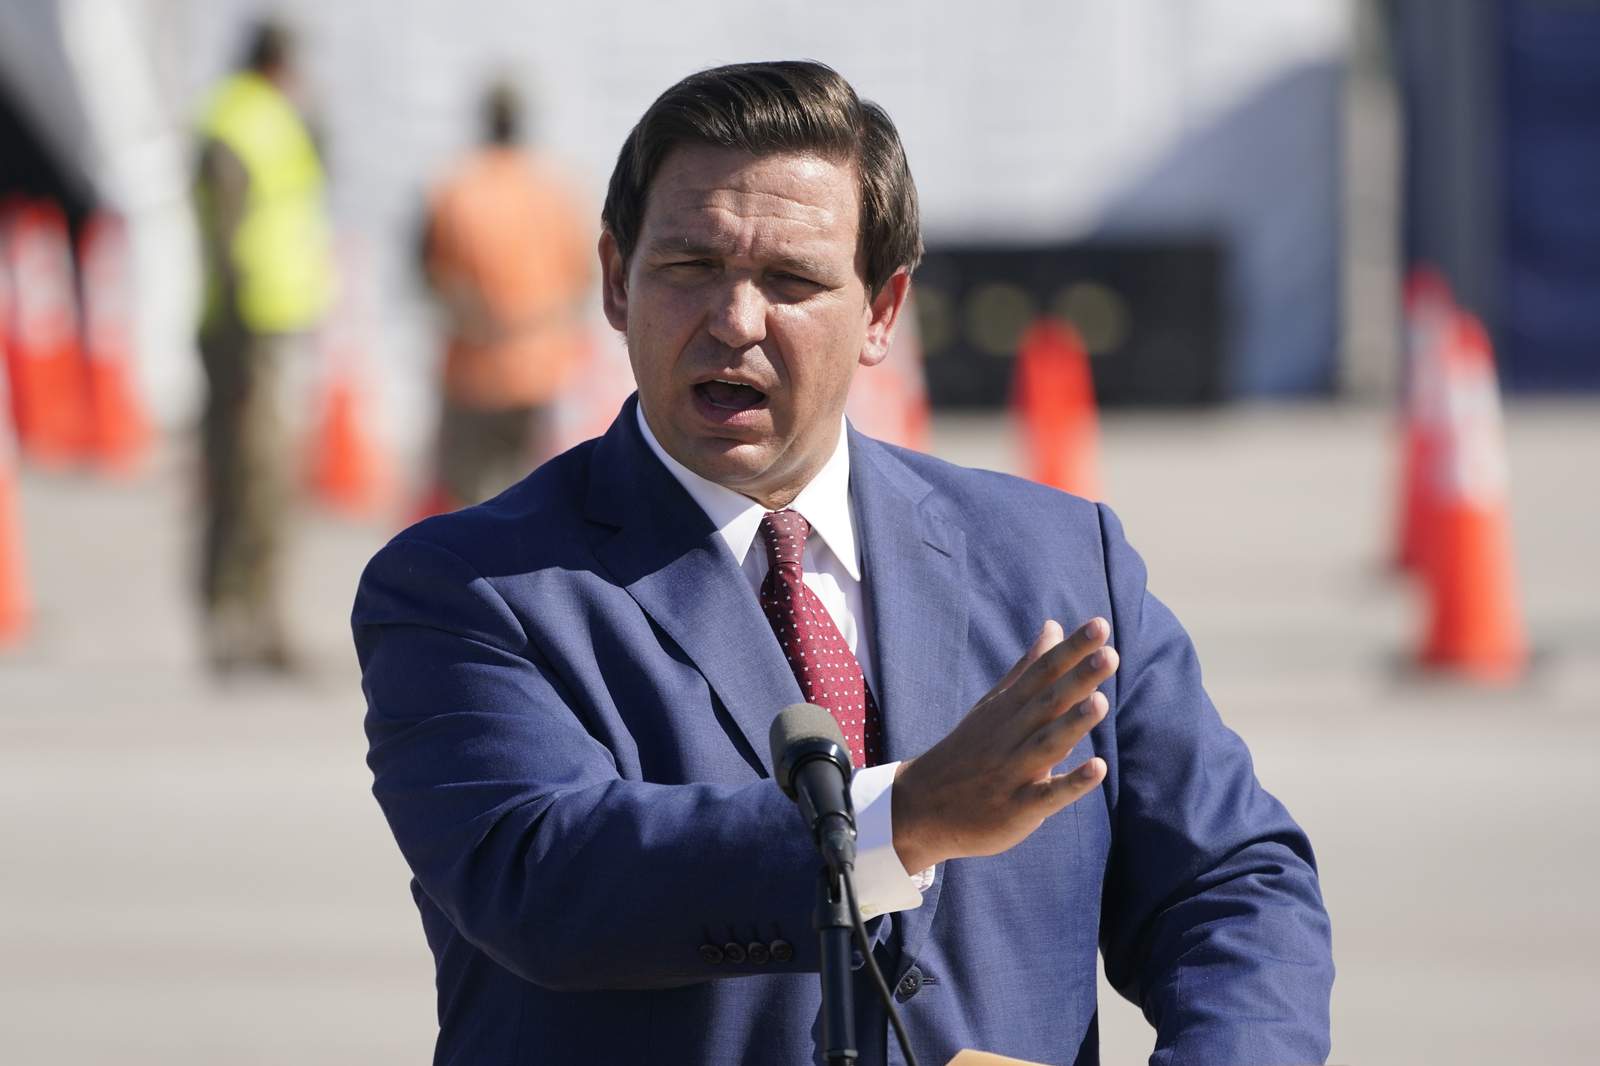 Poll: Majority of Florida voters approve of DeSantis’ performance as governor